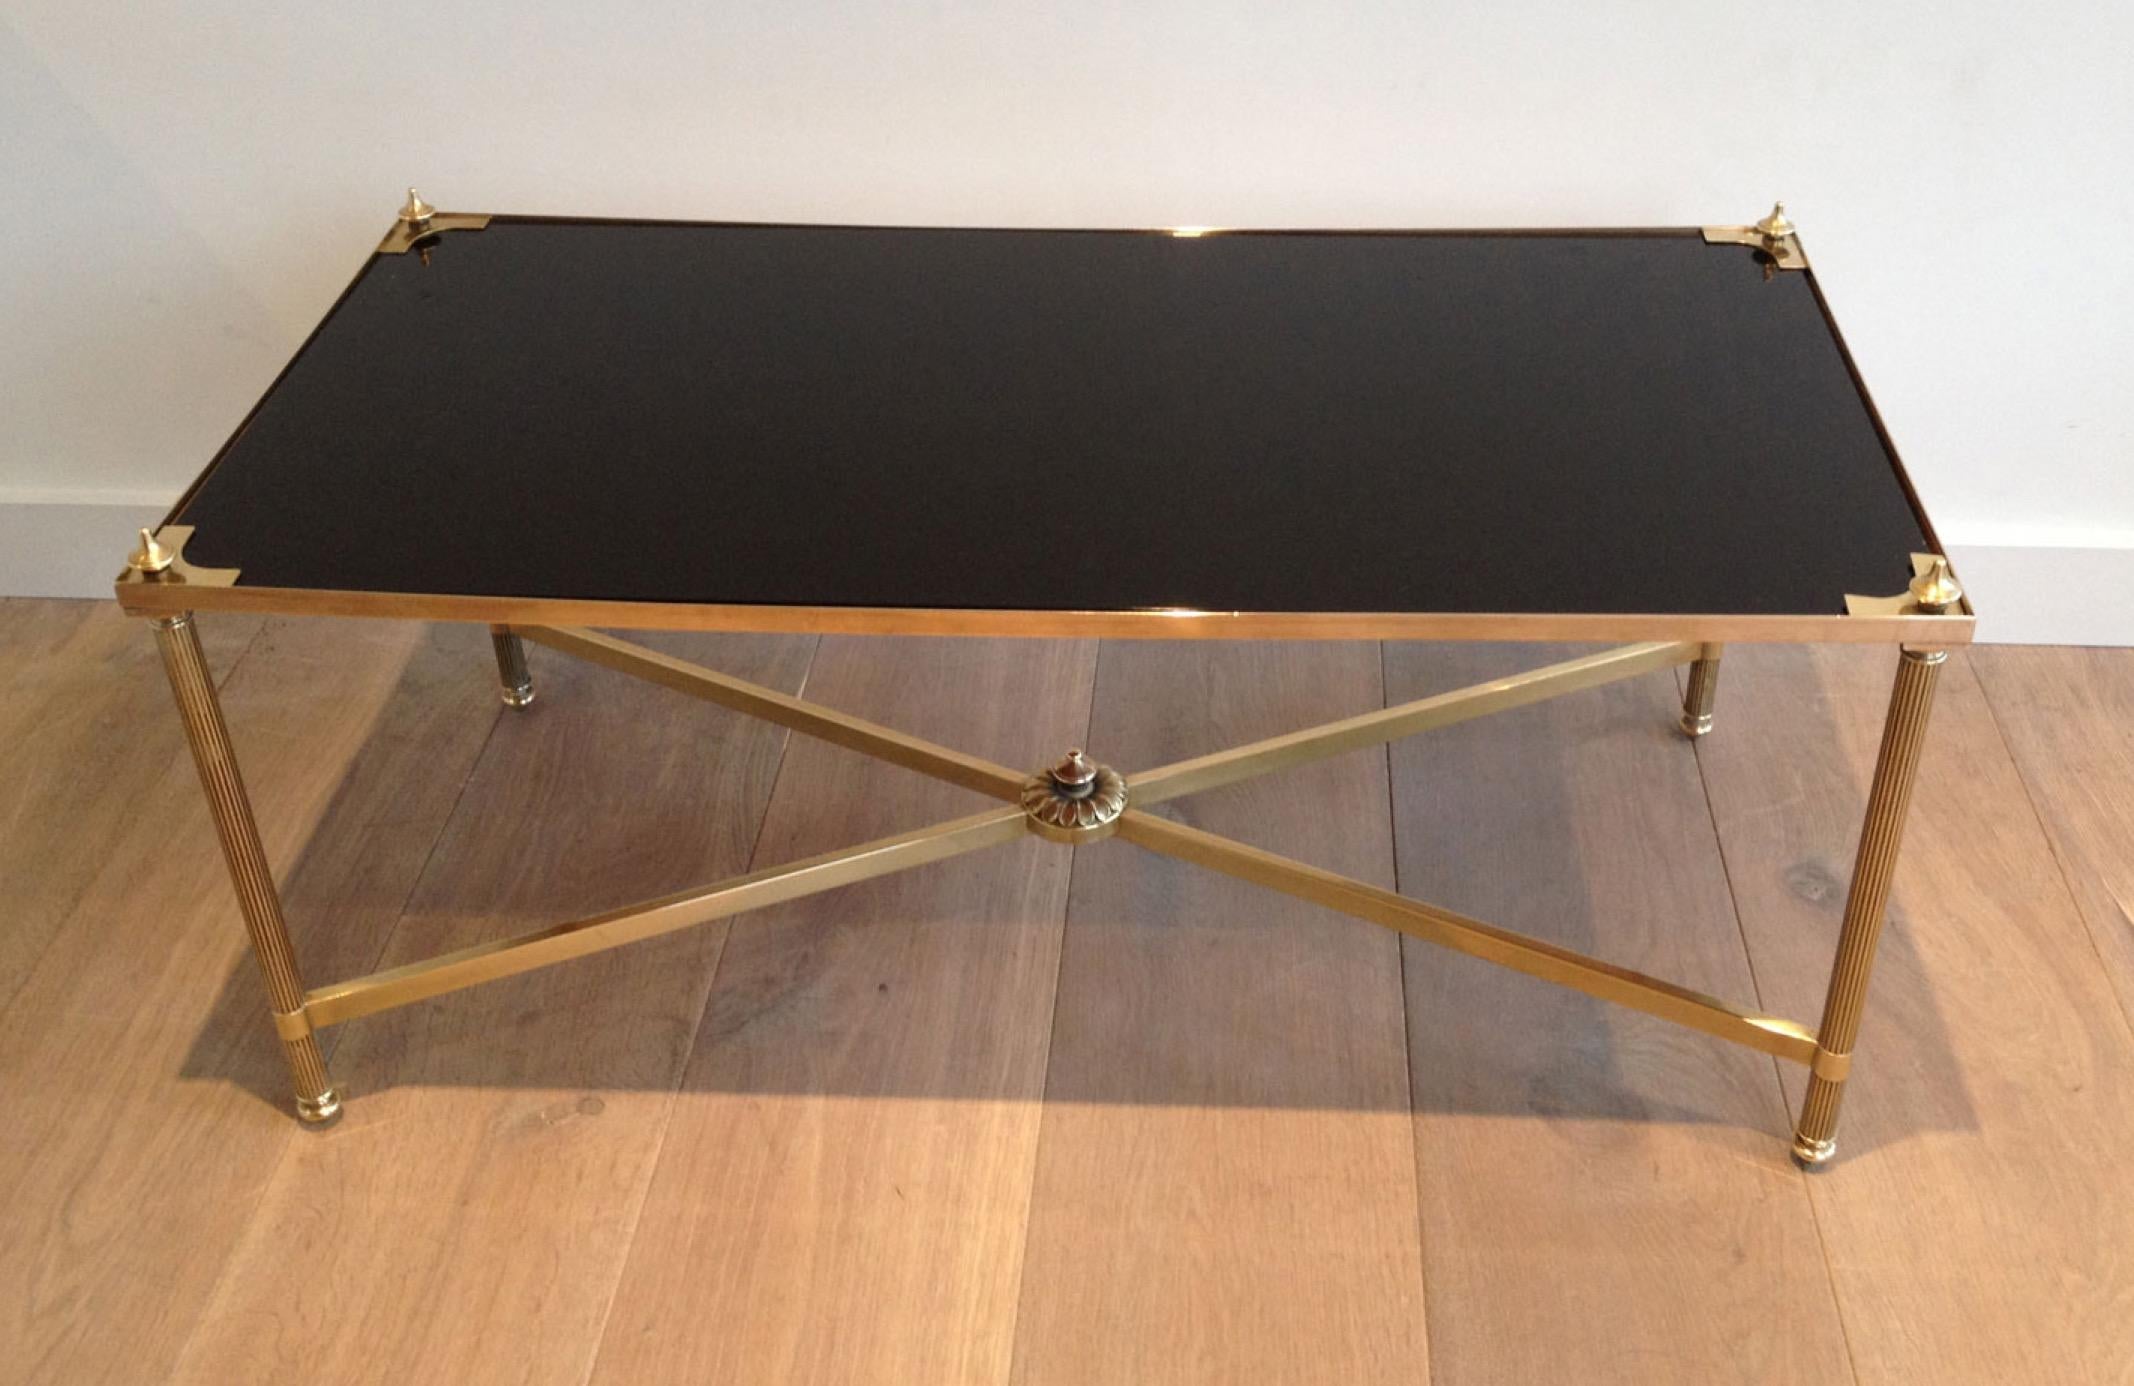 This nice neoclassical style rectangular coffee table is made of brass with fluted legs and a stretcher on the bottom part. It has a black lacquered glass shelf on top with brass triangle and finials on each corner. This is a very elegant cocktail